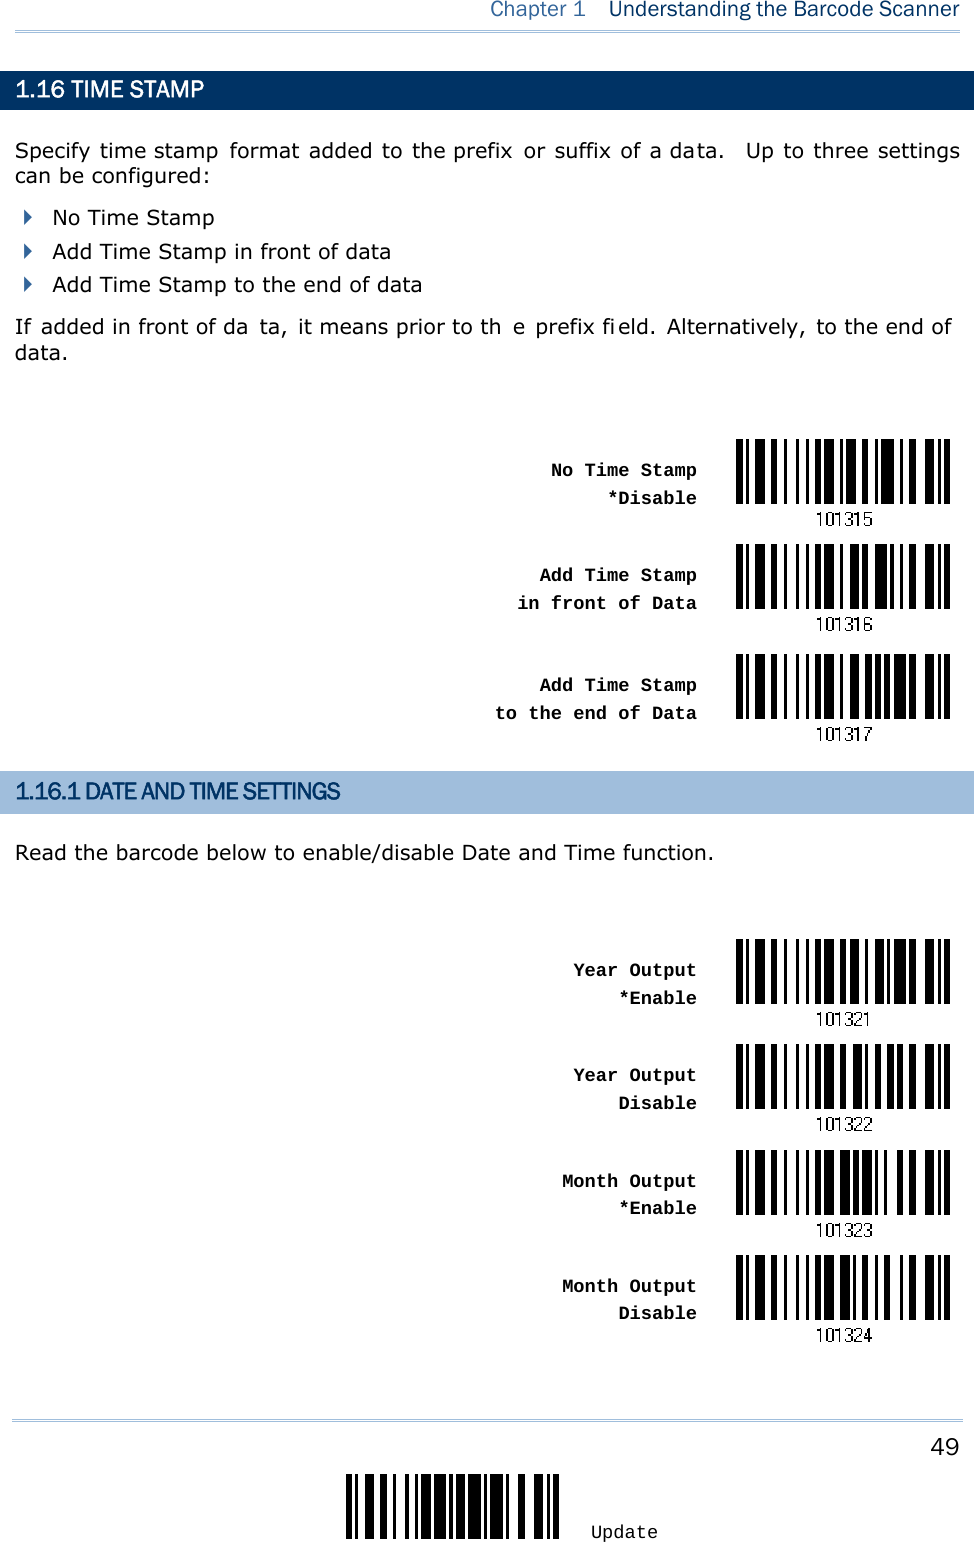     49 Update  Chapter 1  Understanding the Barcode Scanner  1.16 TIME STAMP    Specify time stamp format added to the prefix or suffix of a data.  Up to three settings can be configured:  No Time Stamp  Add Time Stamp in front of data  Add Time Stamp to the end of data If added in front of da ta, it means prior to th e prefix fi eld. Alternatively, to the end of data.   No Time Stamp*Disable Add Time Stamp in front of Data Add Time Stamp to the end of Data1.16.1 DATE AND TIME SETTINGS Read the barcode below to enable/disable Date and Time function.   Year Output*Enable Year OutputDisable Month Output*Enable Month OutputDisable 